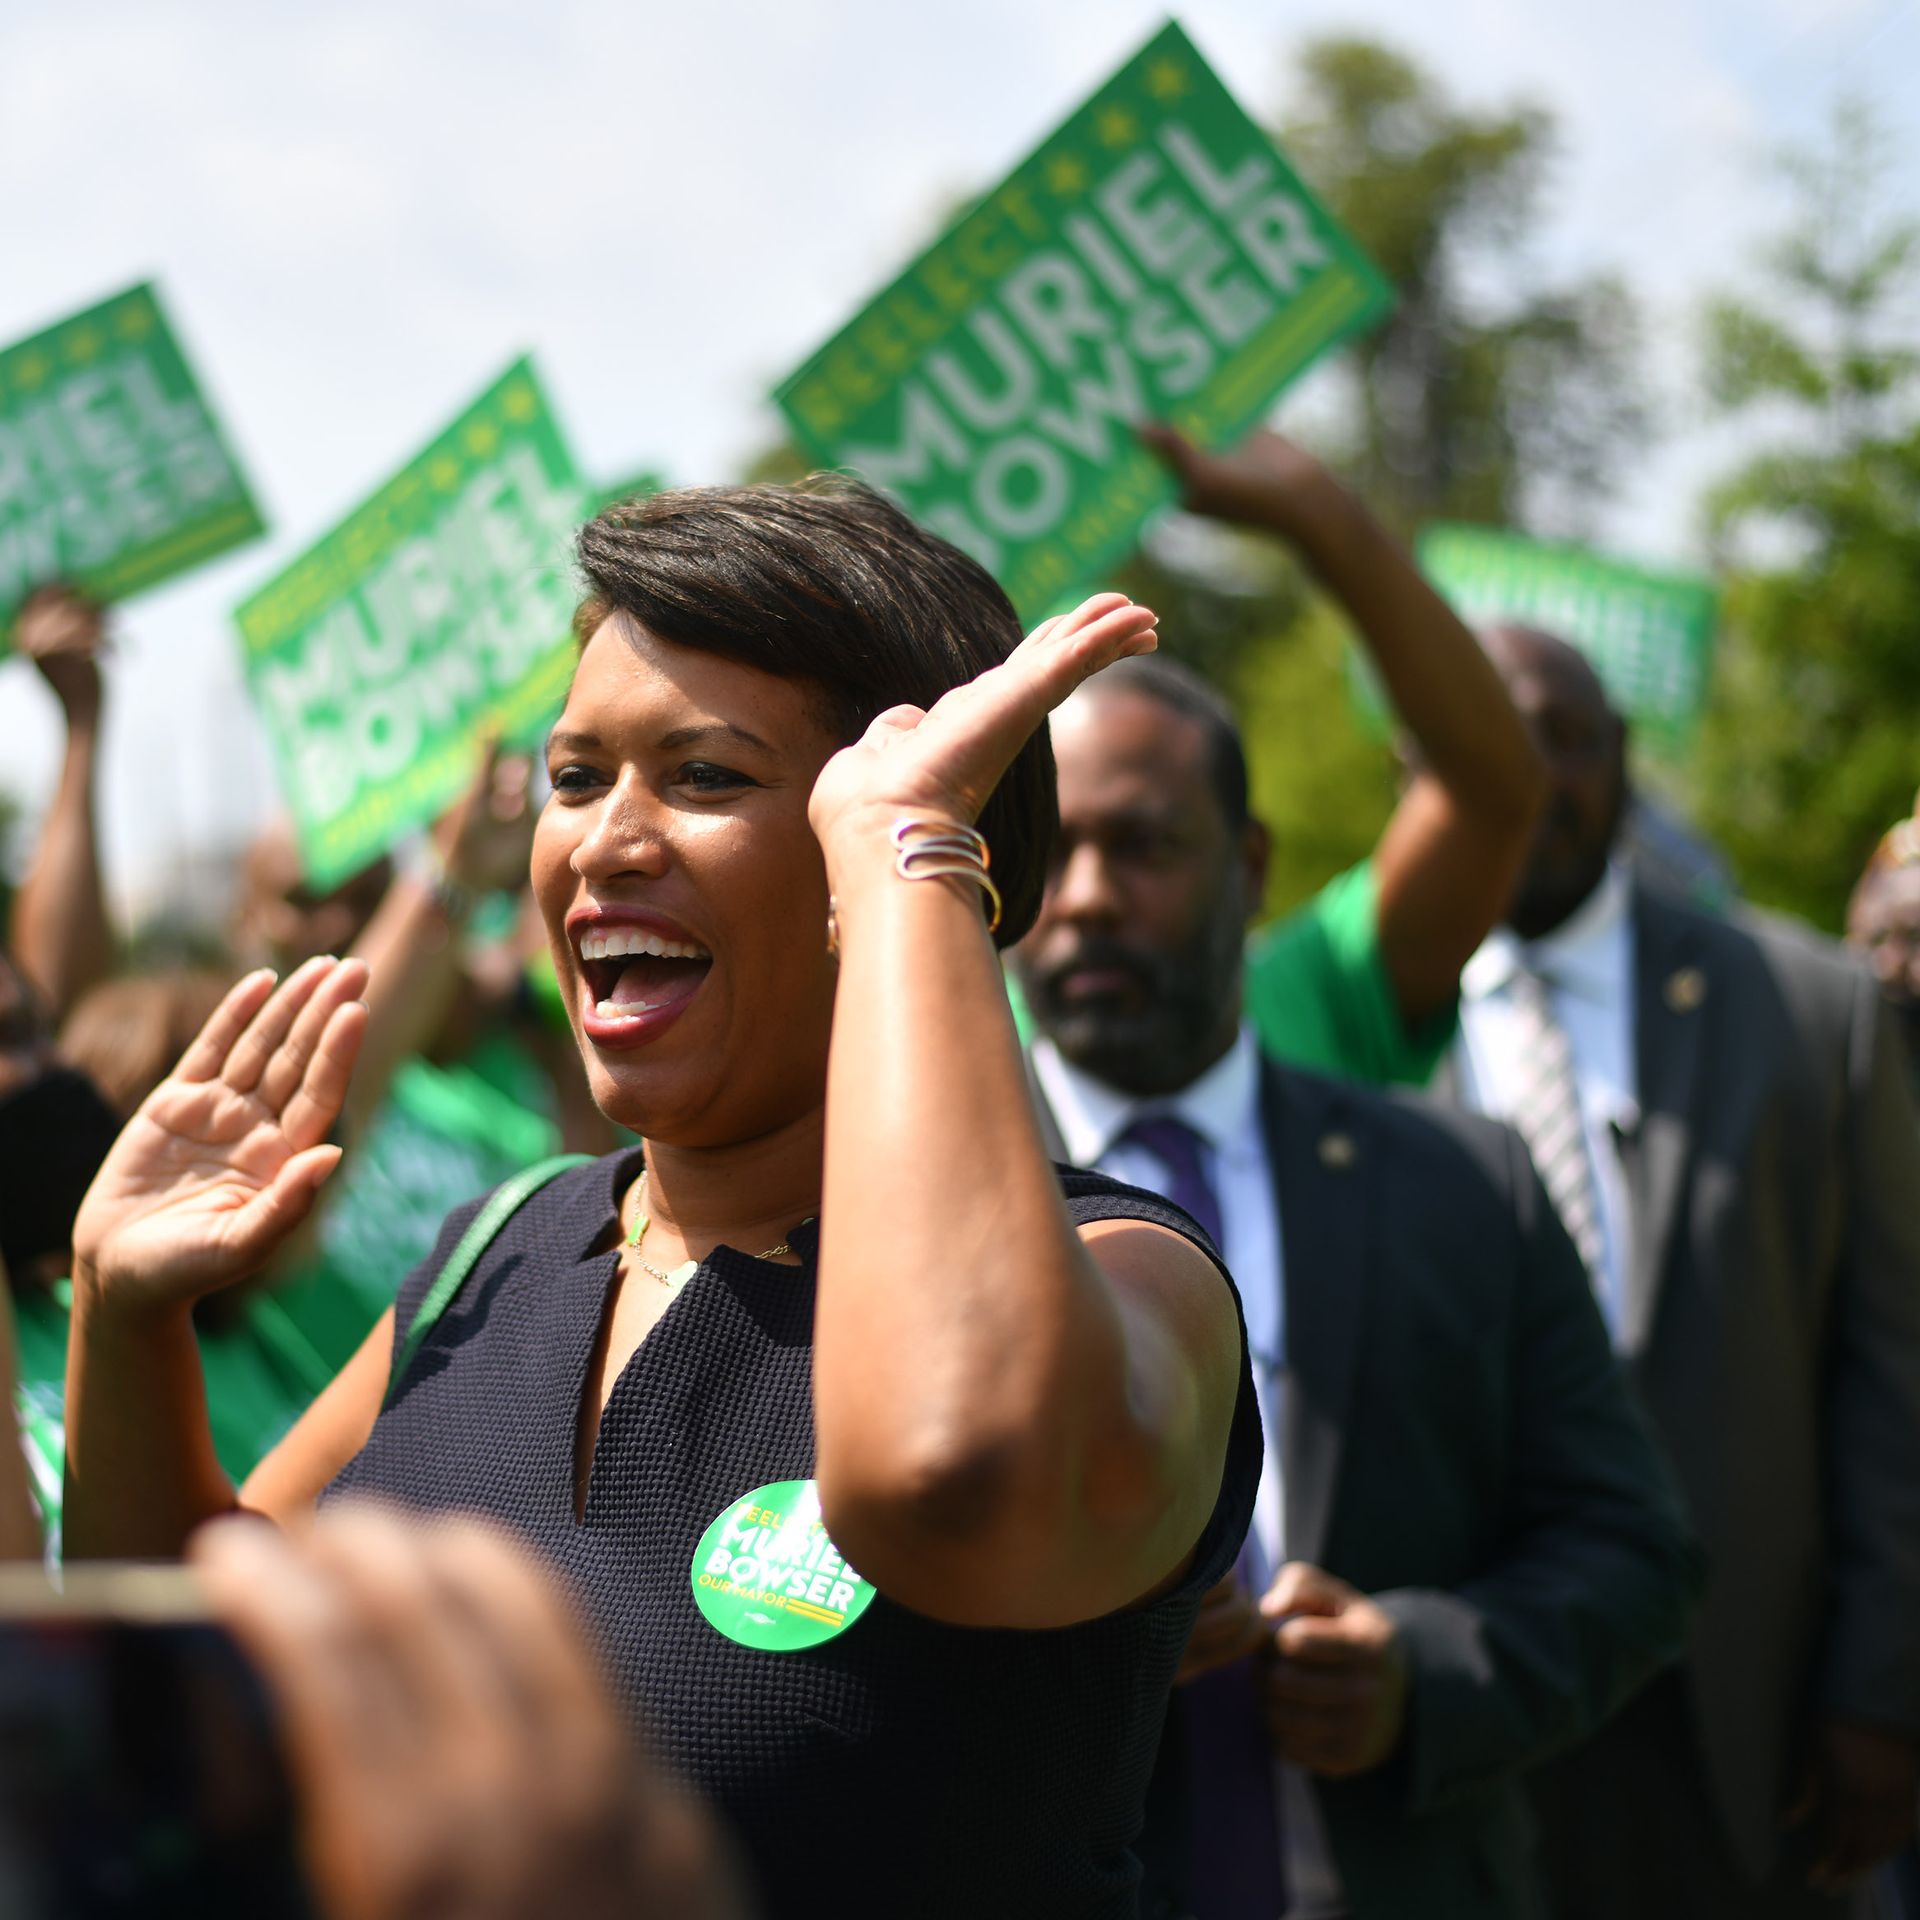 Muriel Bowser surrounded by supporters